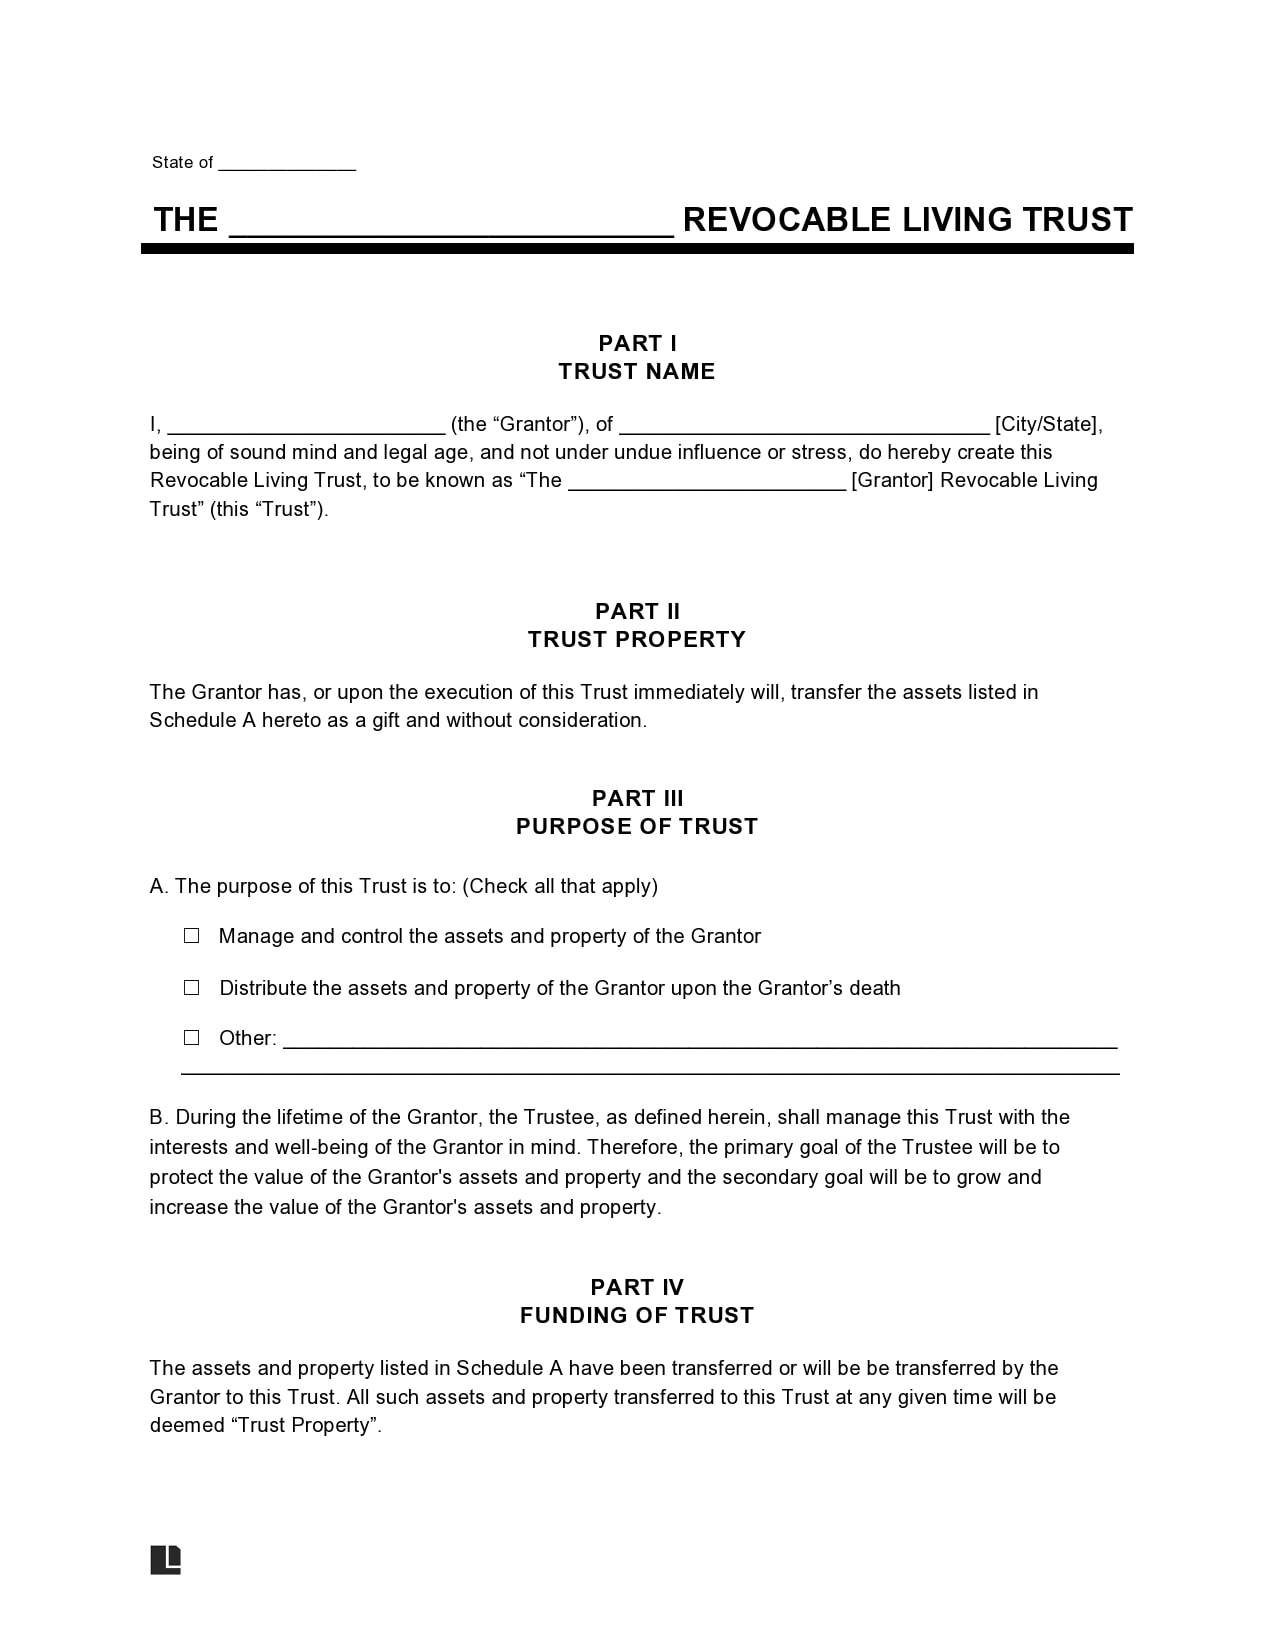 30-free-living-trust-forms-templates-word-templatearchive